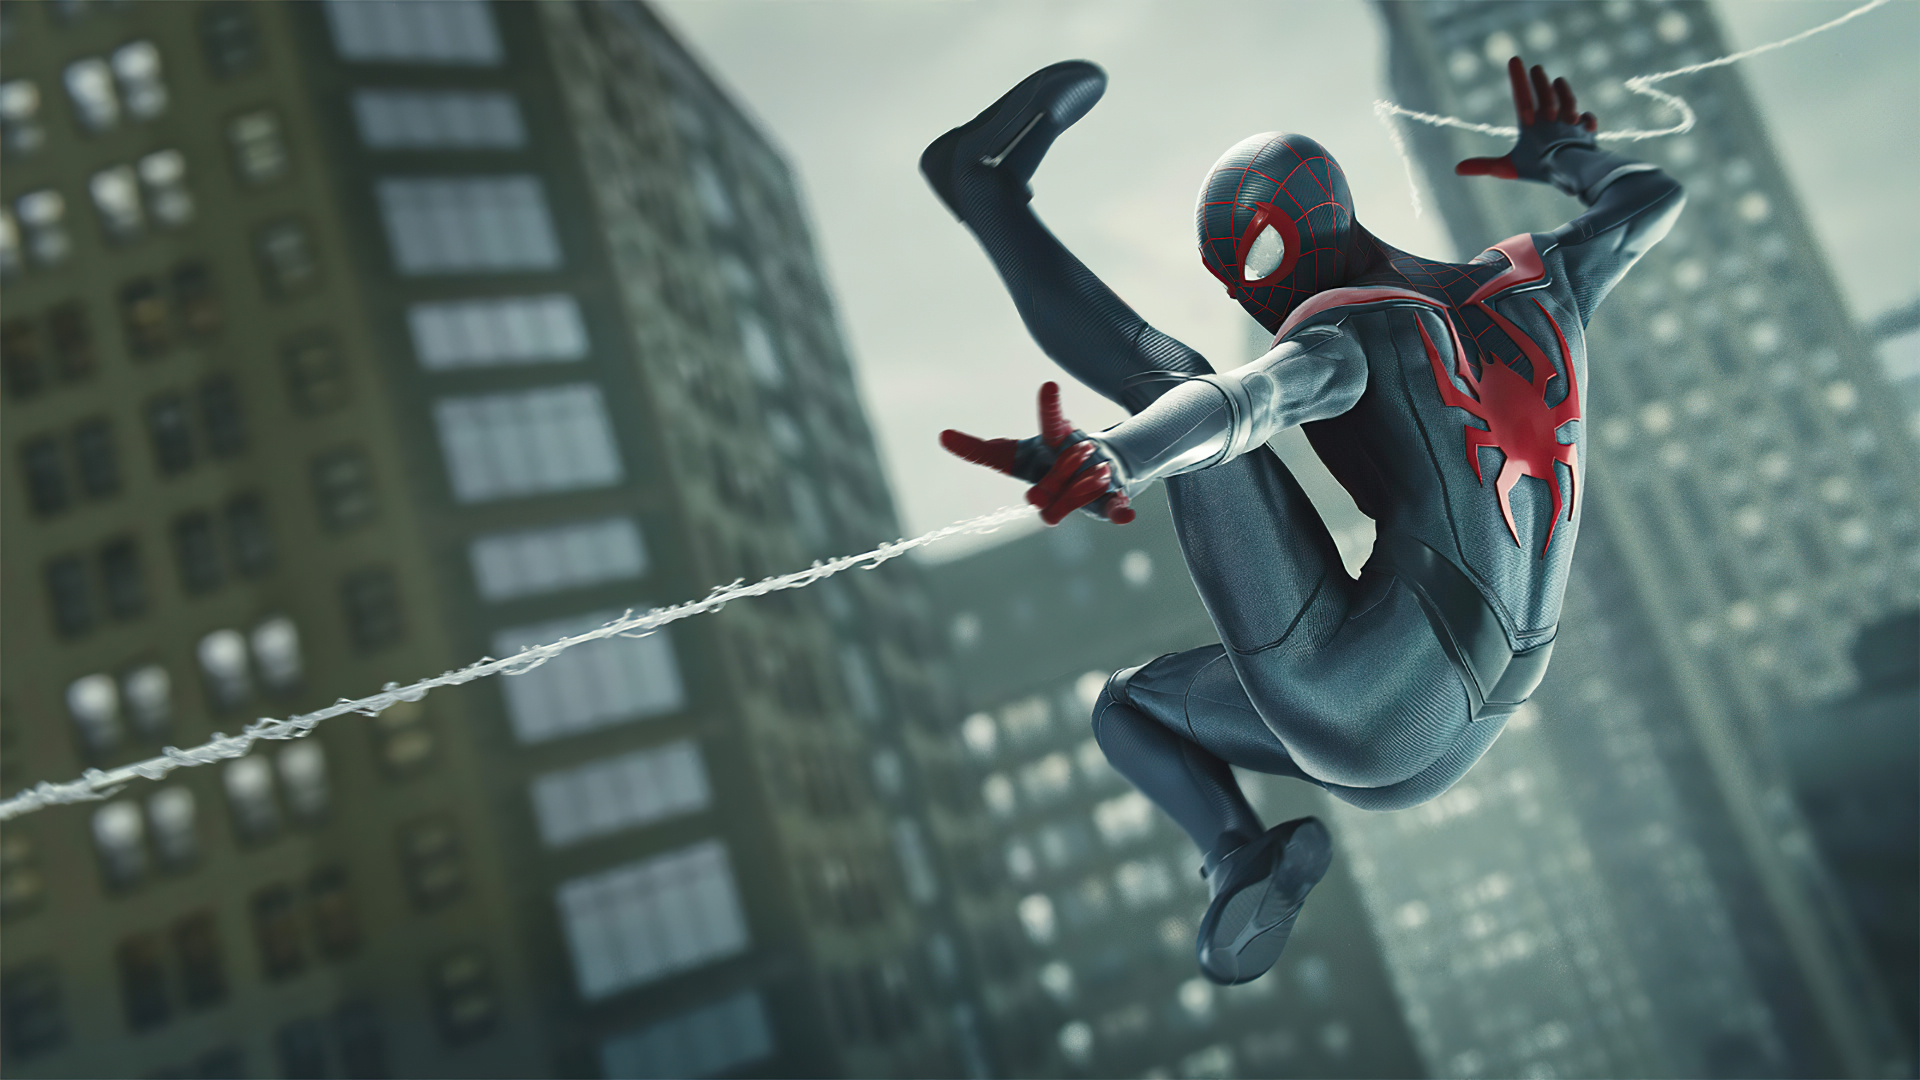 download spider man miles morales for pc